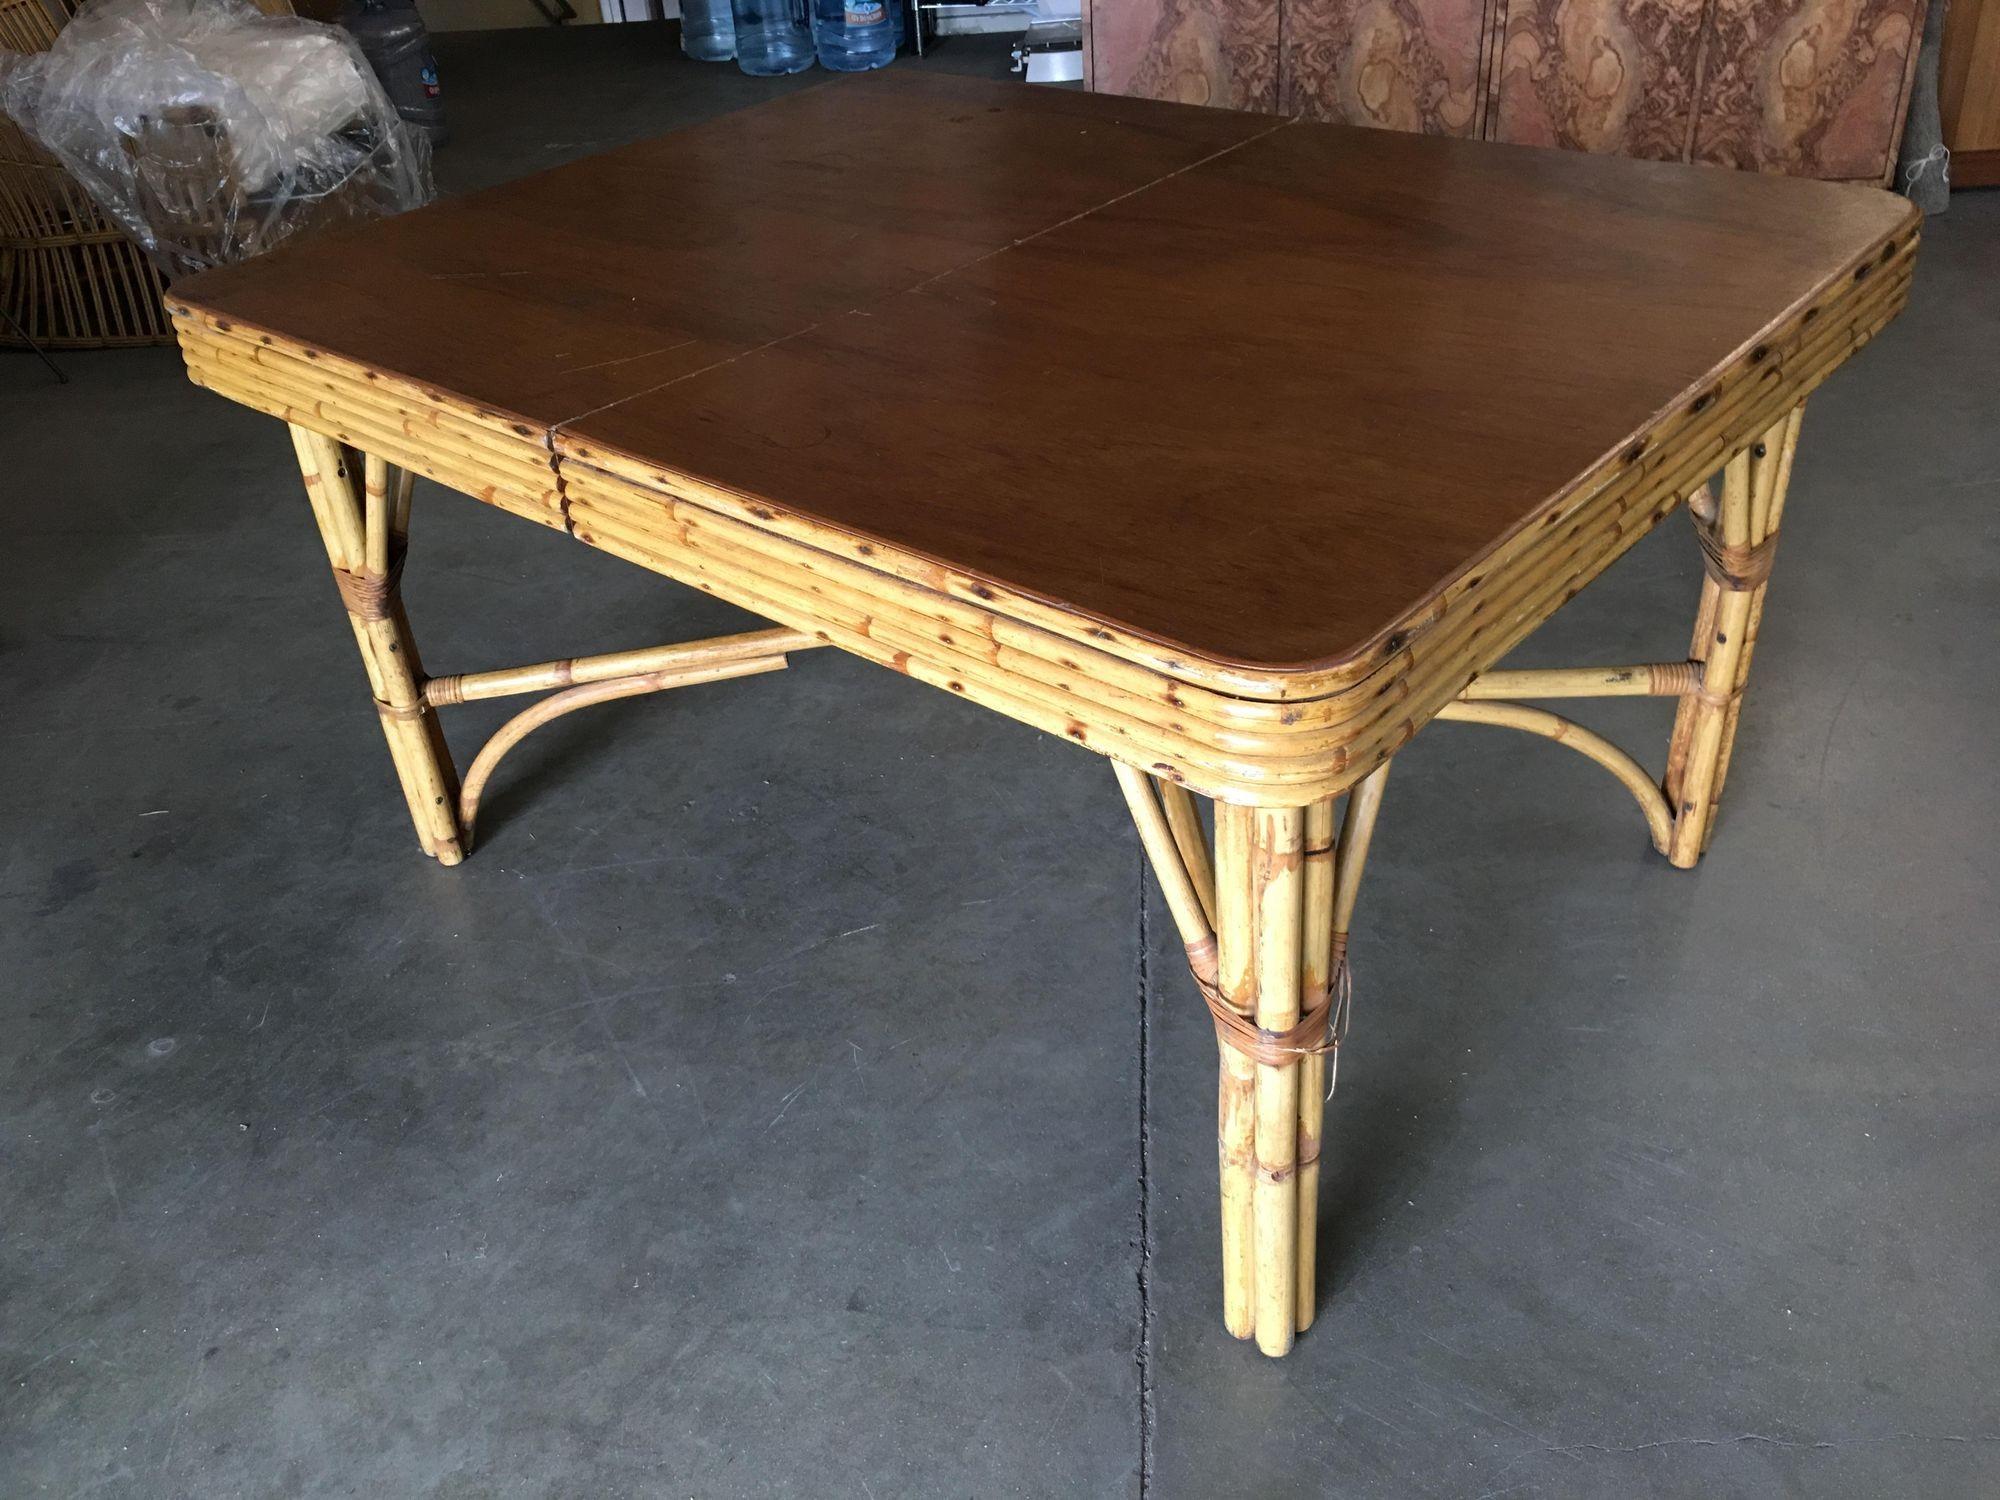 Restored Six Person Rattan Dining Table W/ Stacked Mahogany Top In Excellent Condition For Sale In Van Nuys, CA